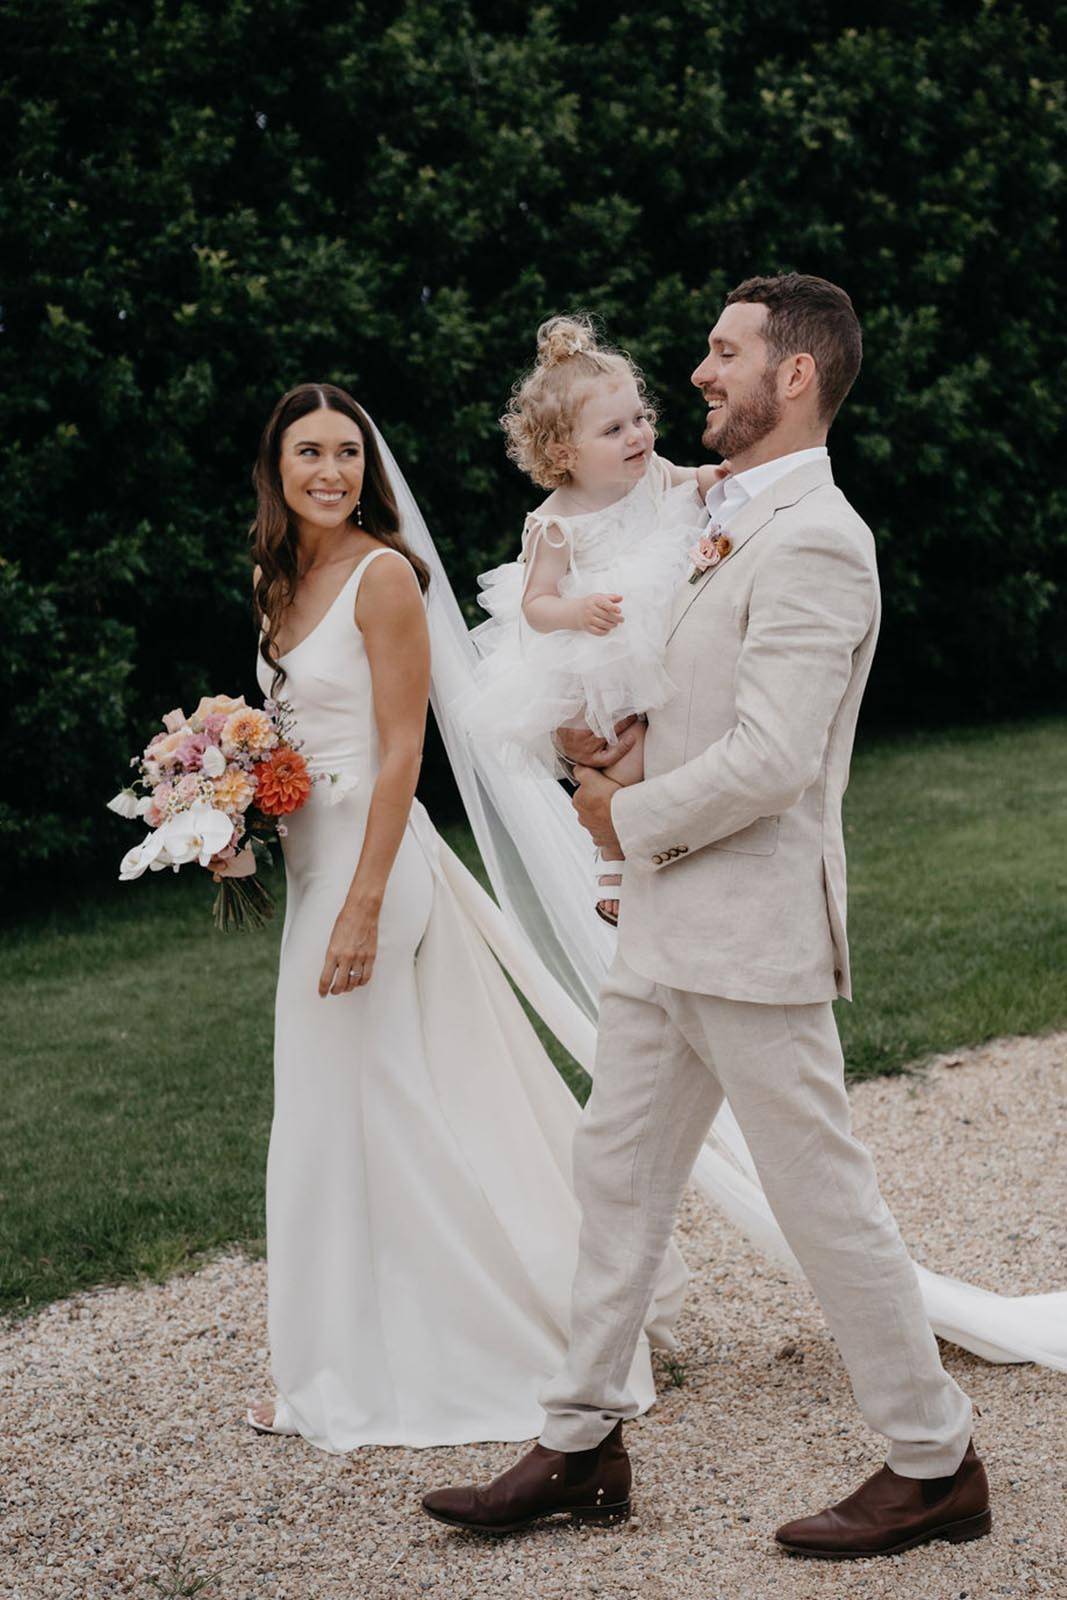 Heartwarming moment captured as the bride and groom are seen holding their daughter together. The groom is cradling his little girl in his arms